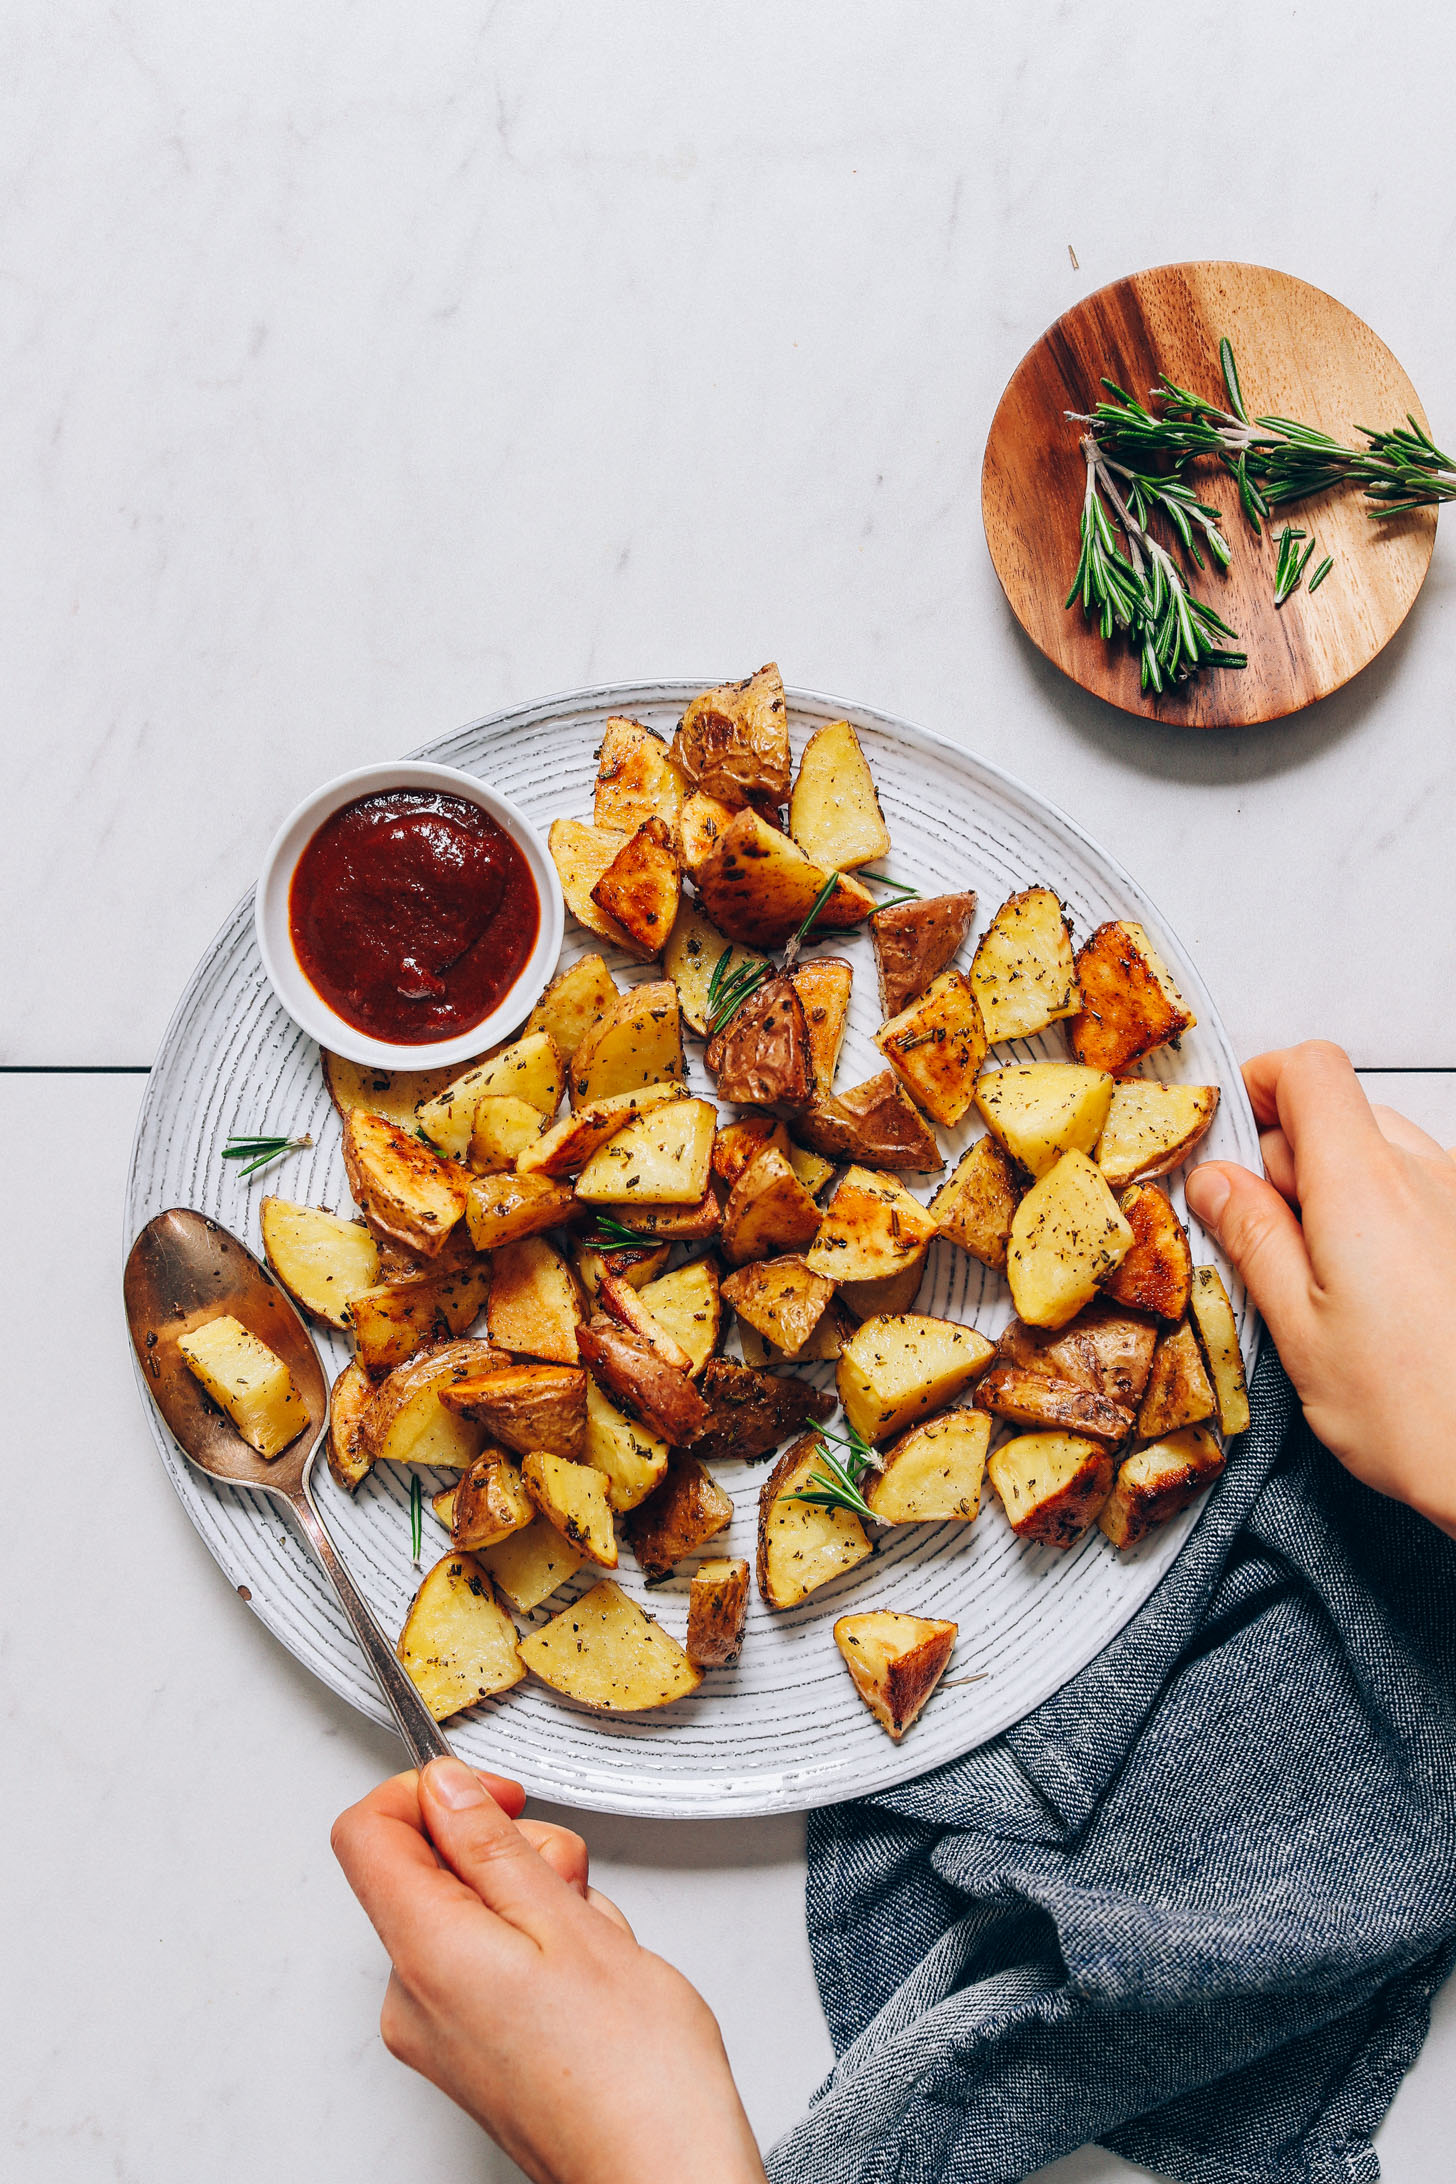 Holding the sides of a plate of Rosemary Roasted Potatoes